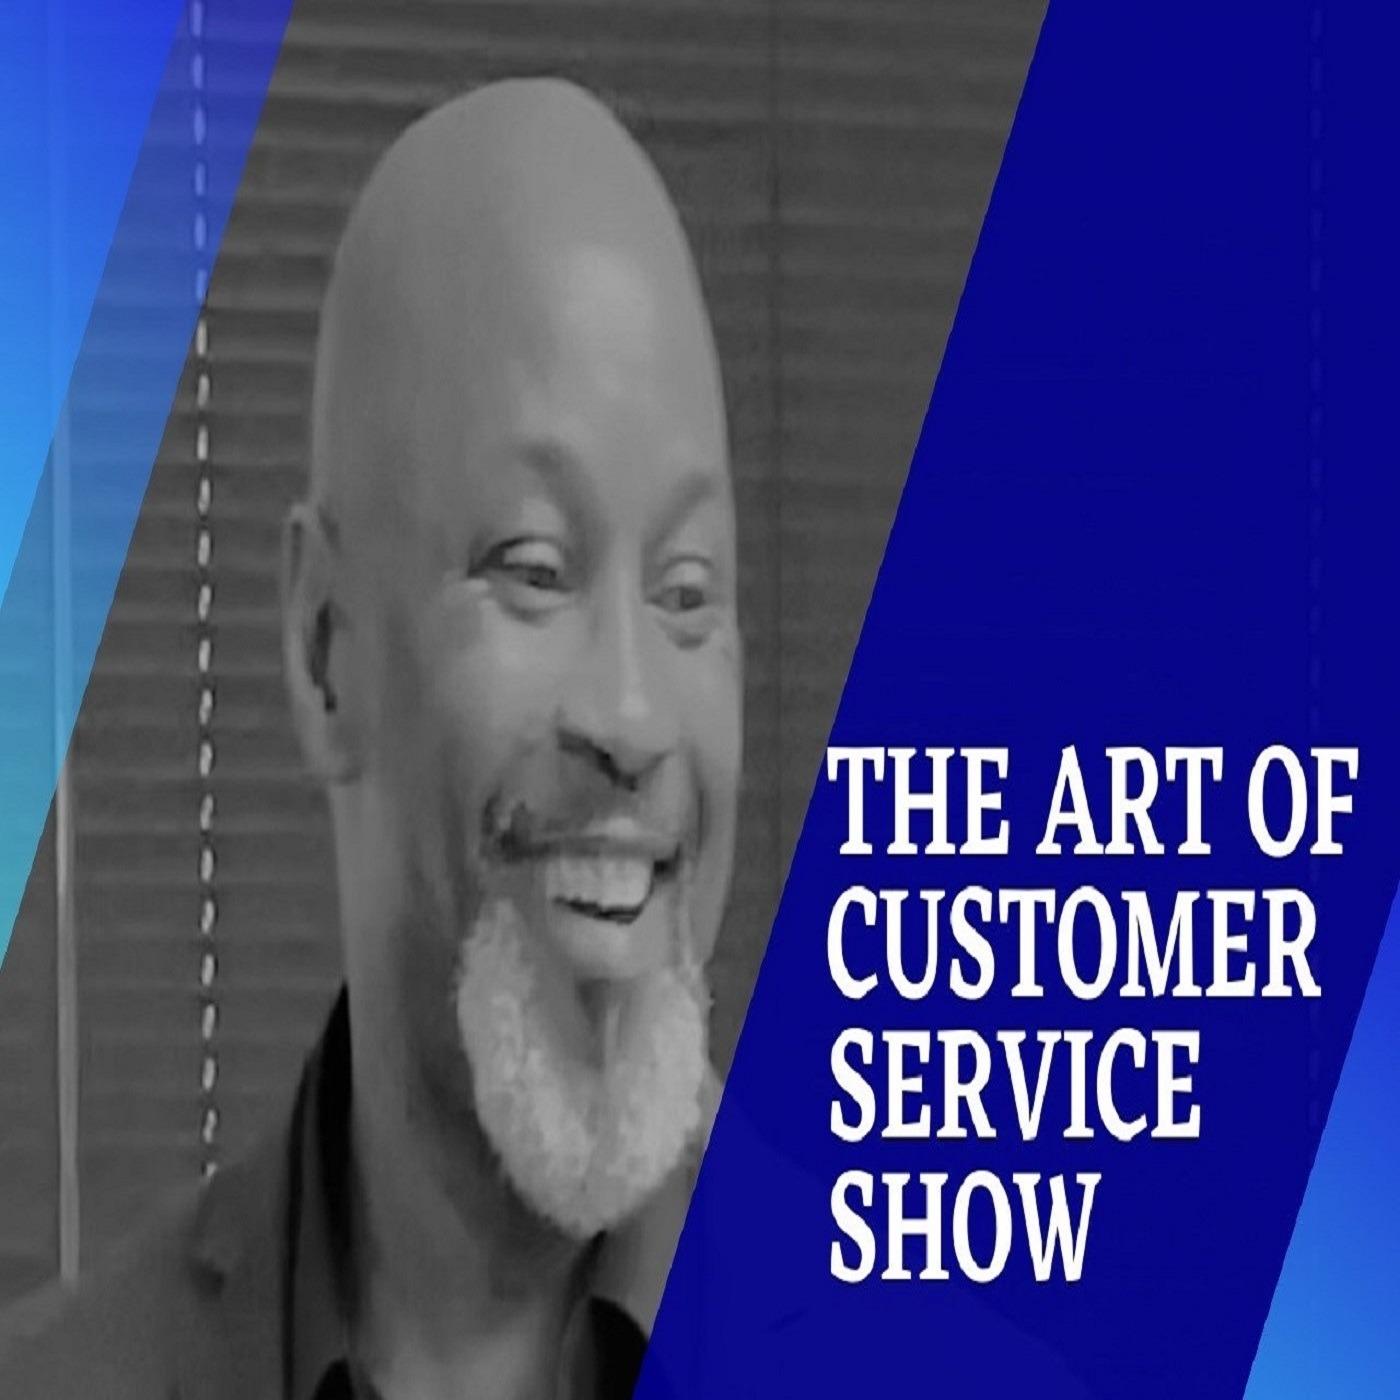 The Art Of Customer Service Show